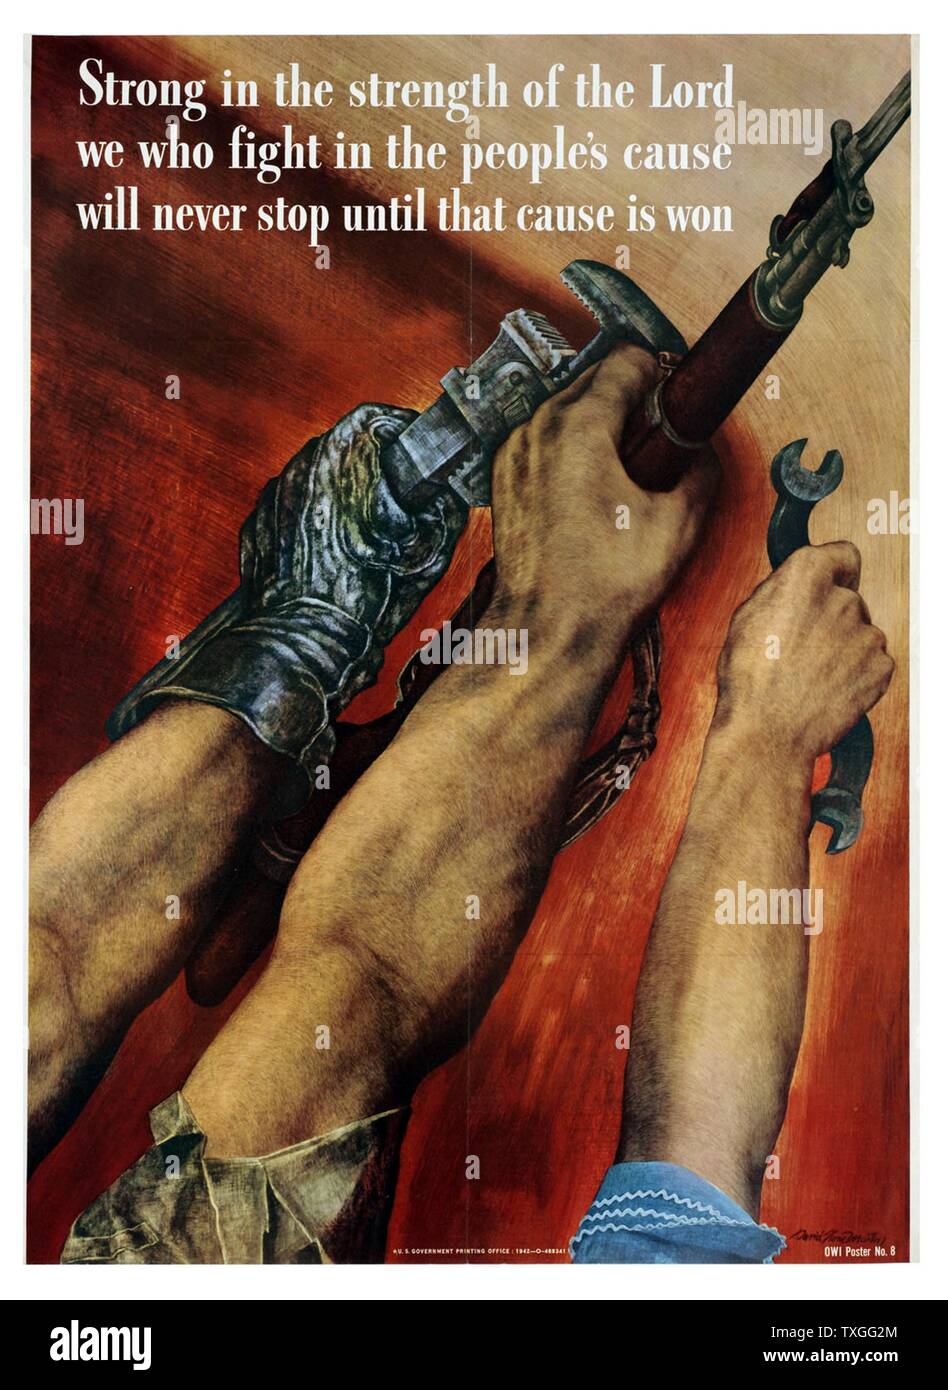 Propaganda poster from WWII advertising the importance of helping the war effort through employment. Stock Photo